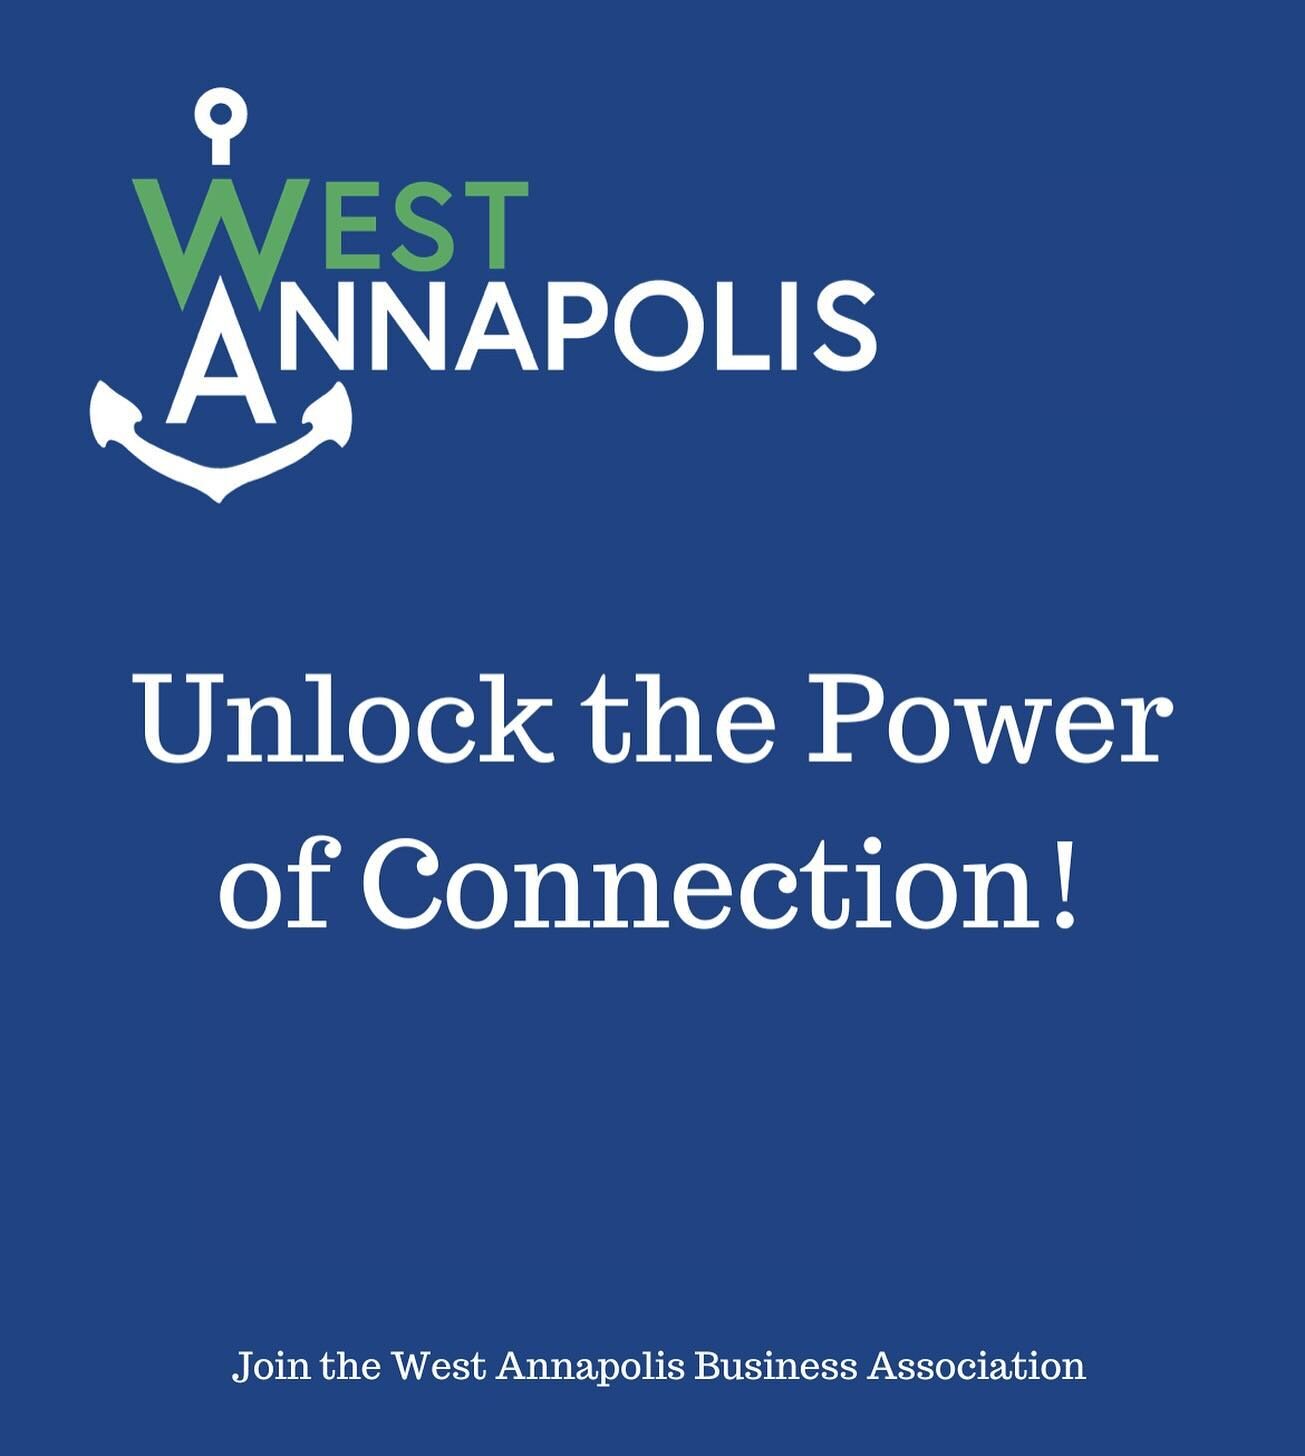 Hey, West Annapolis movers and shakers! Connect with the West Annapolis community, and join the West Annapolis Business Association (WABA)! Connect with like-minded entrepreneurs, share insights, and boost your network in the heart of West Annapolis.